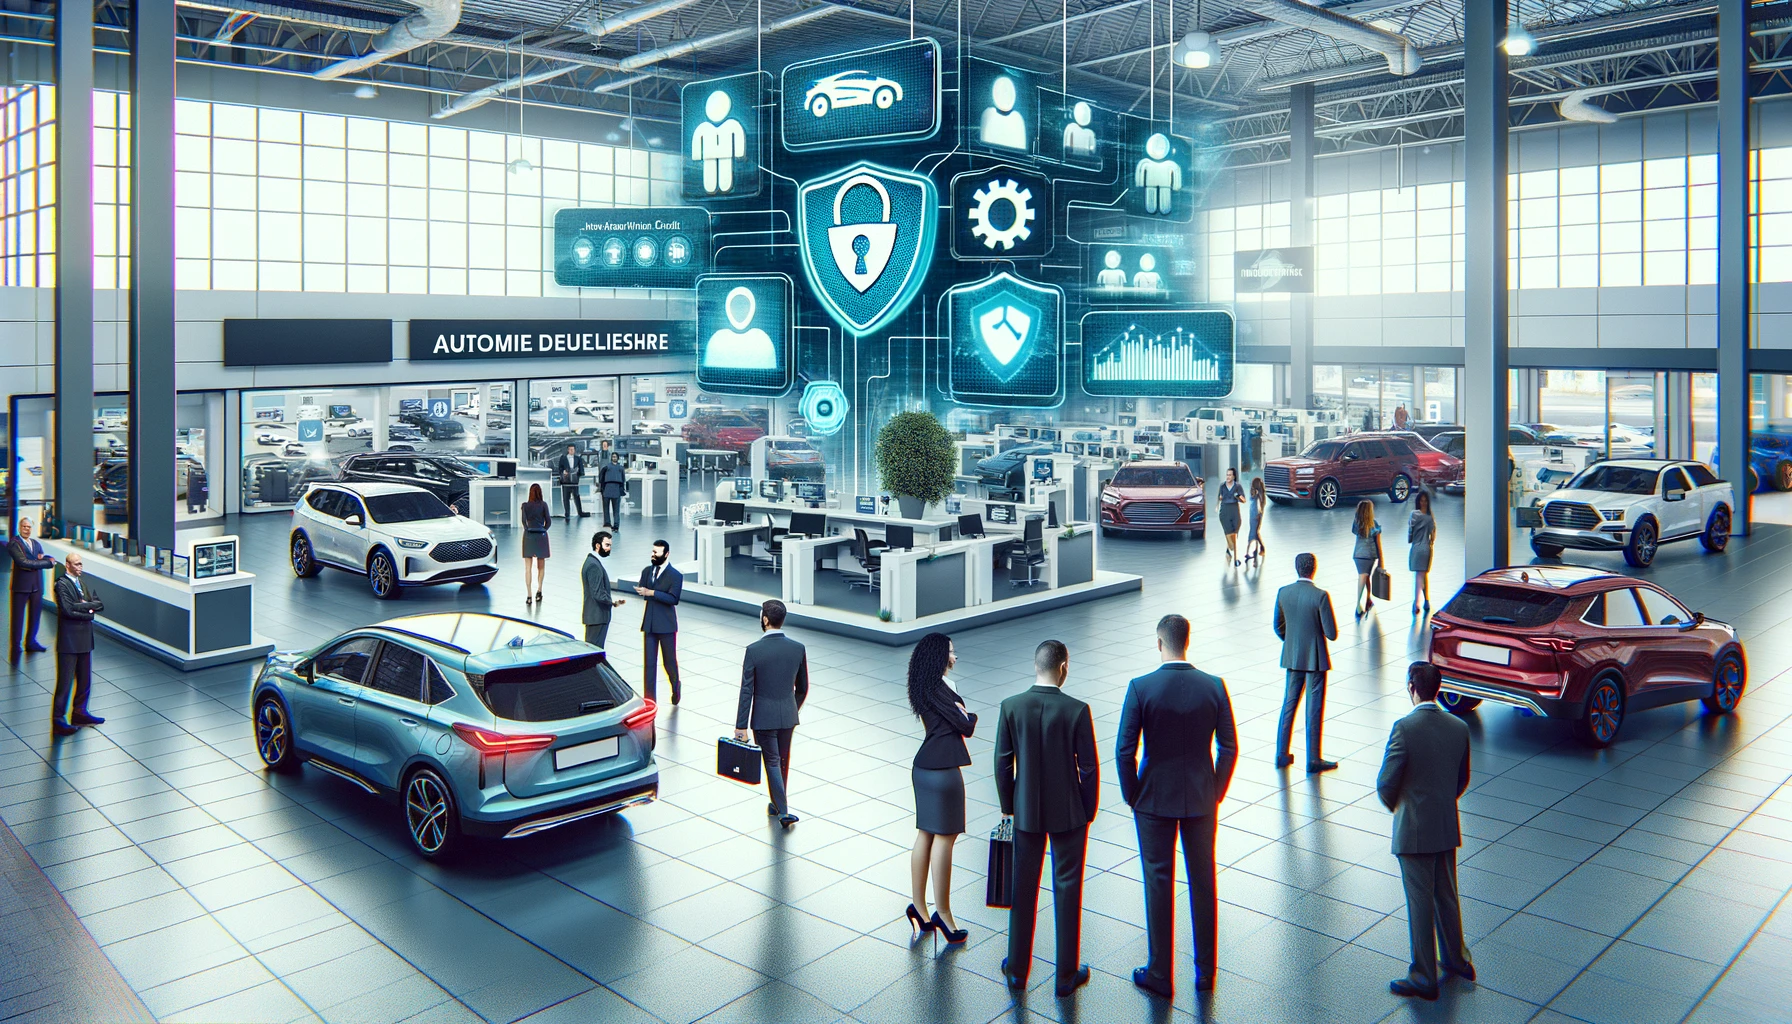 Modern auto dealership with new cars on display, customers interacting with sales staff, and digital screens showcasing cybersecurity measures.